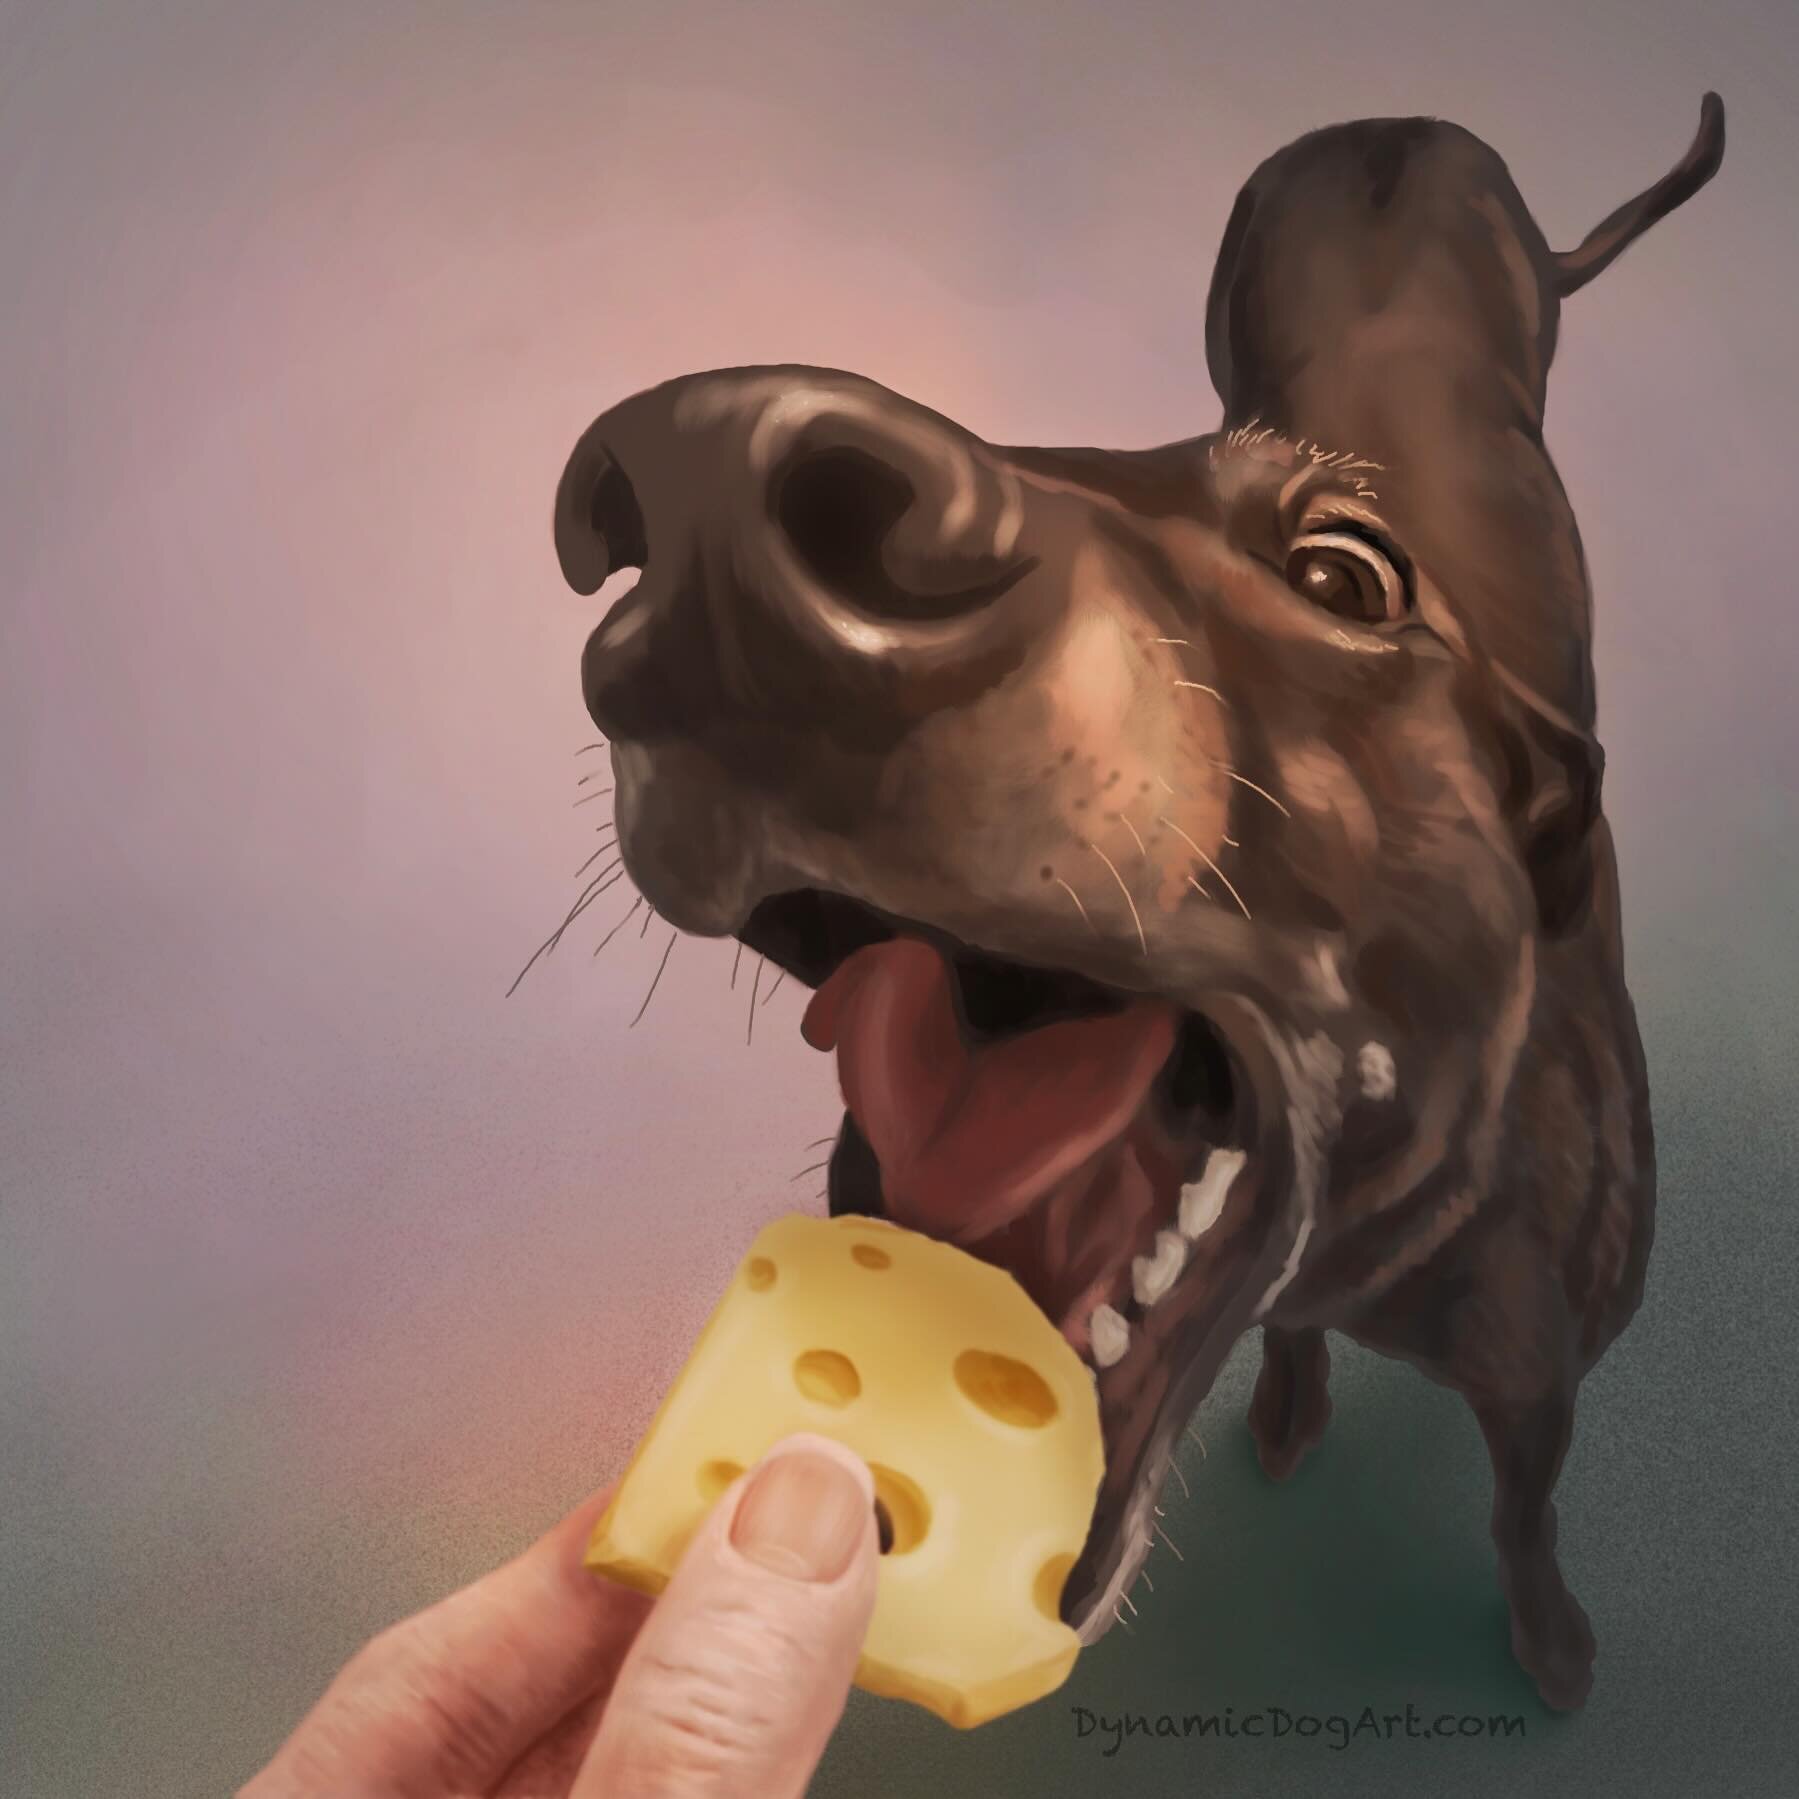 Cheese tax, cheese tax, you gotta pay the cheese tax! 🤭🐾💖

Just a silly one to share today 🧀
The February Newsletter is out, if you don&rsquo;t subscribe, you can find it at DynamicDogArt.com under the Newsletter tab. 

I hope that you are having